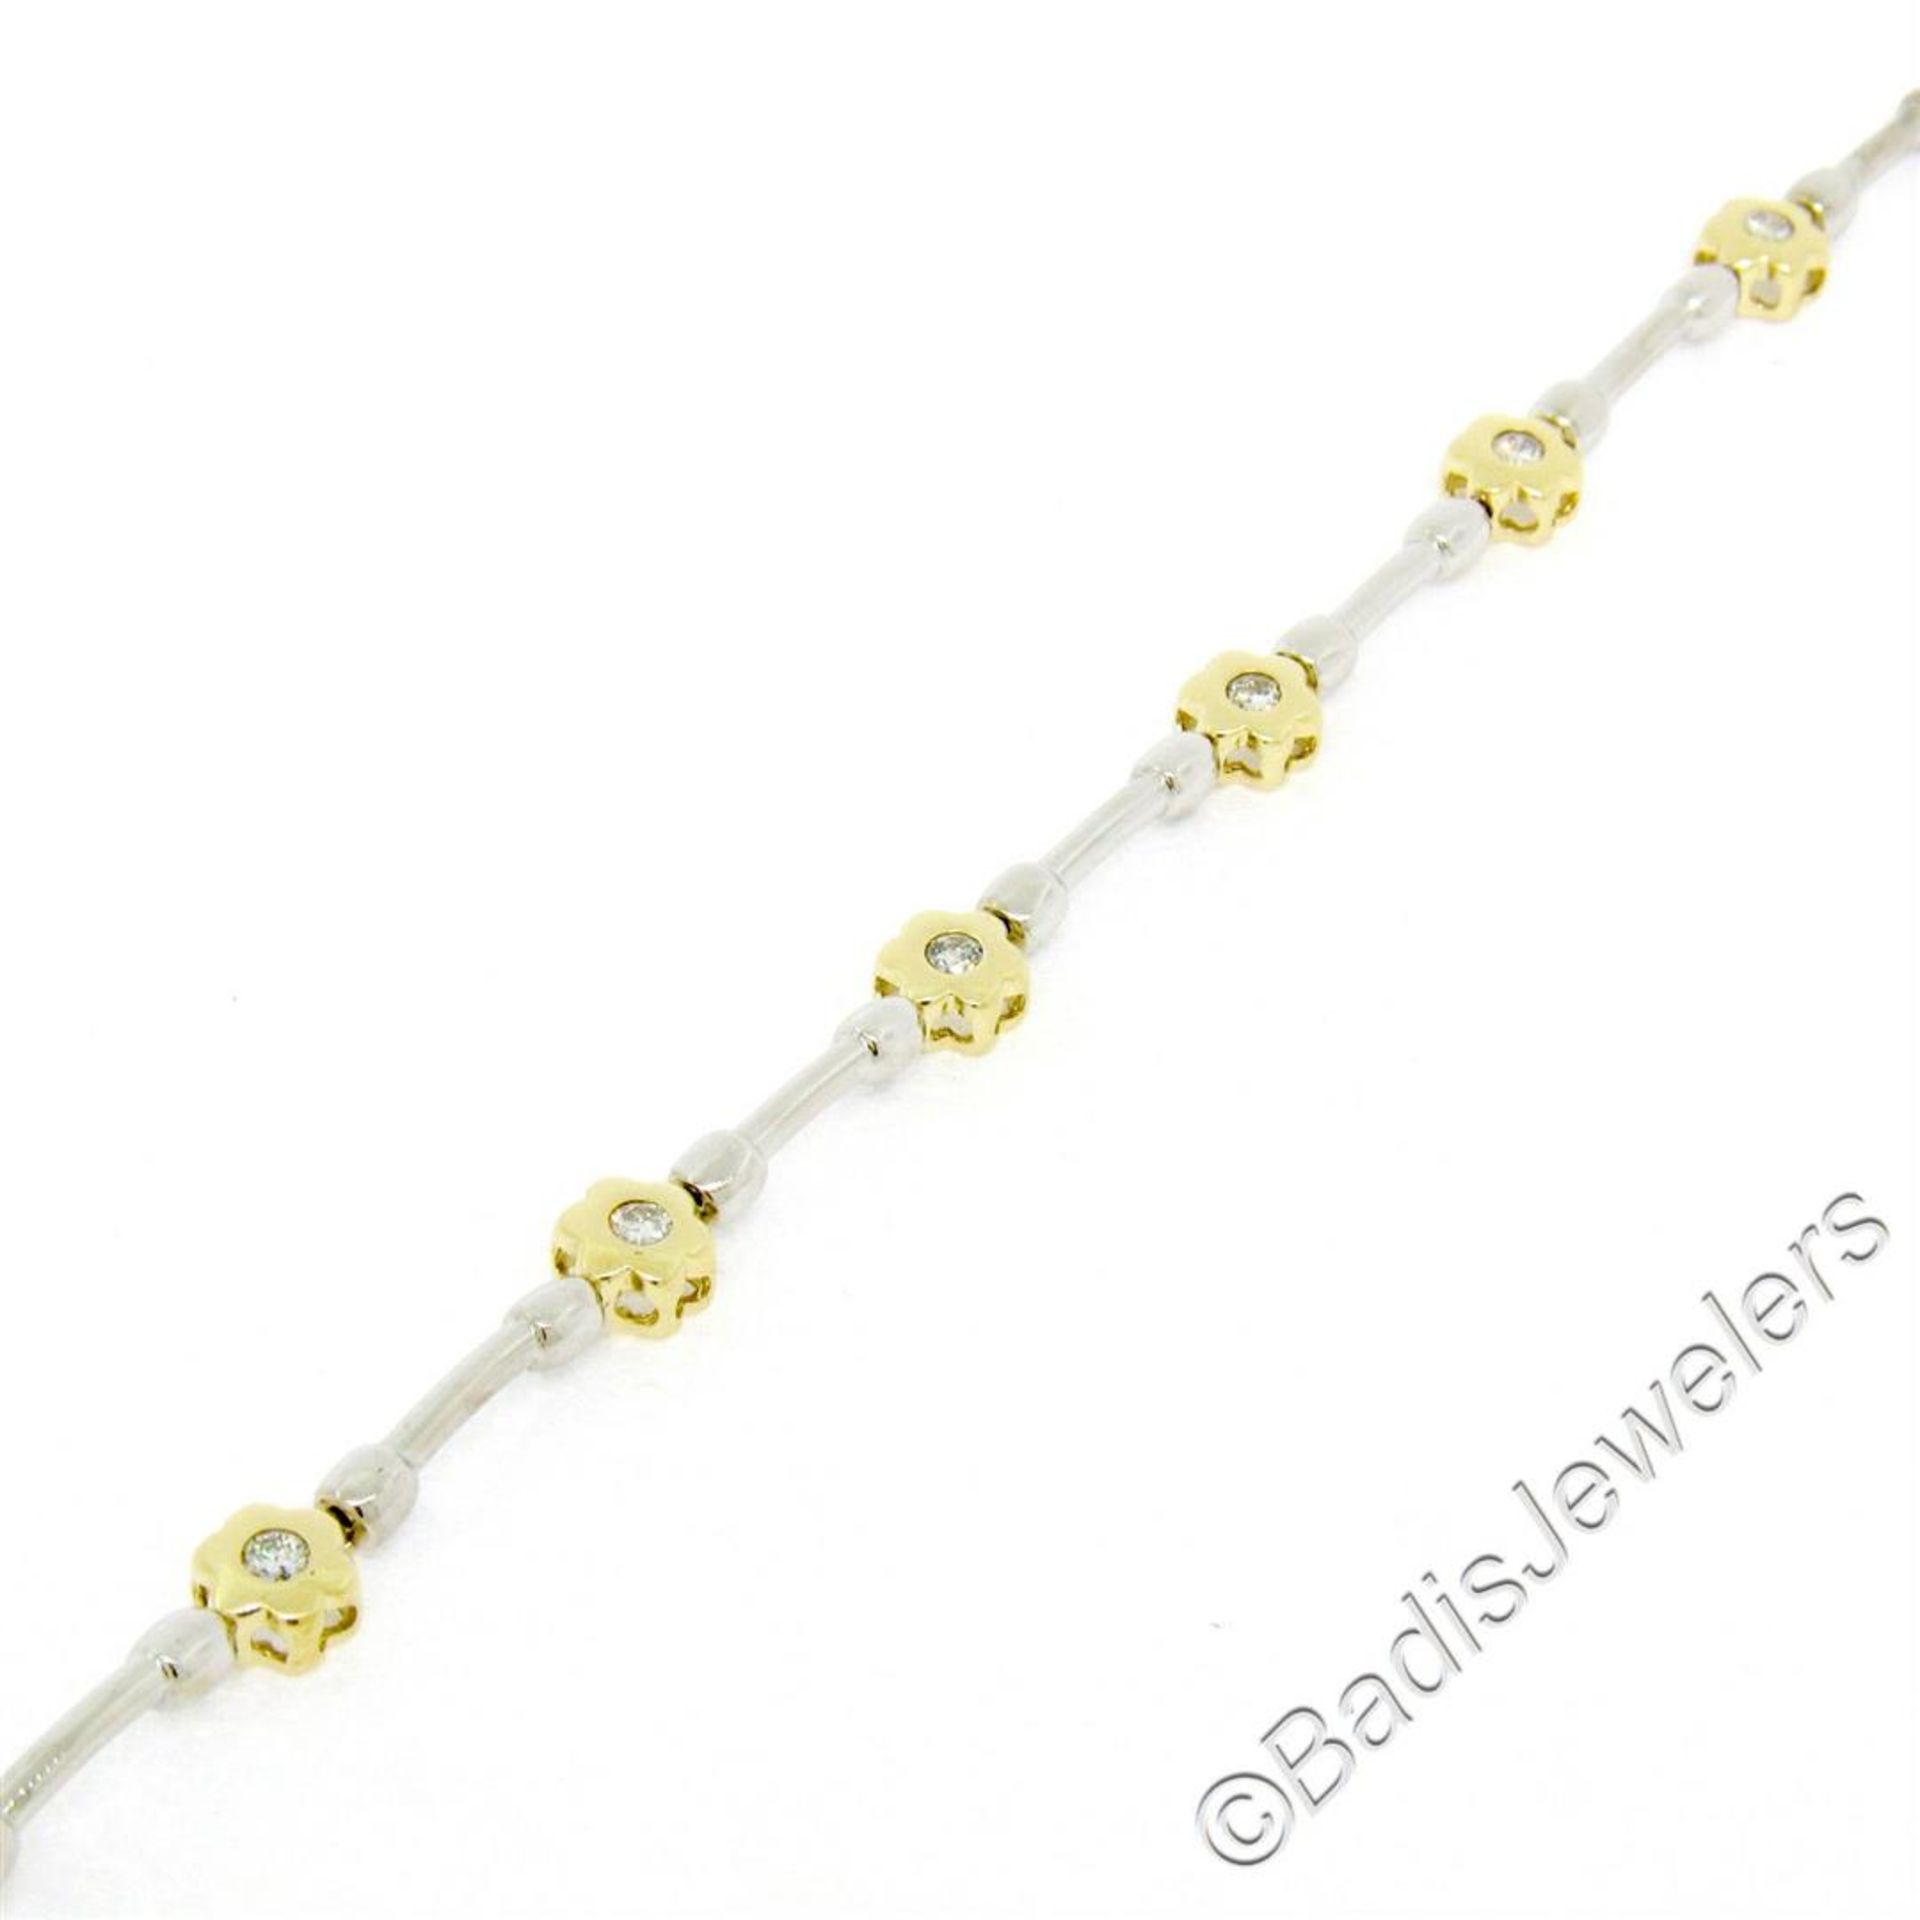 14kt White and Yellow Gold 0.50 ctw Burnish Diamond Flower and Bar Link Bracelet - Image 5 of 8